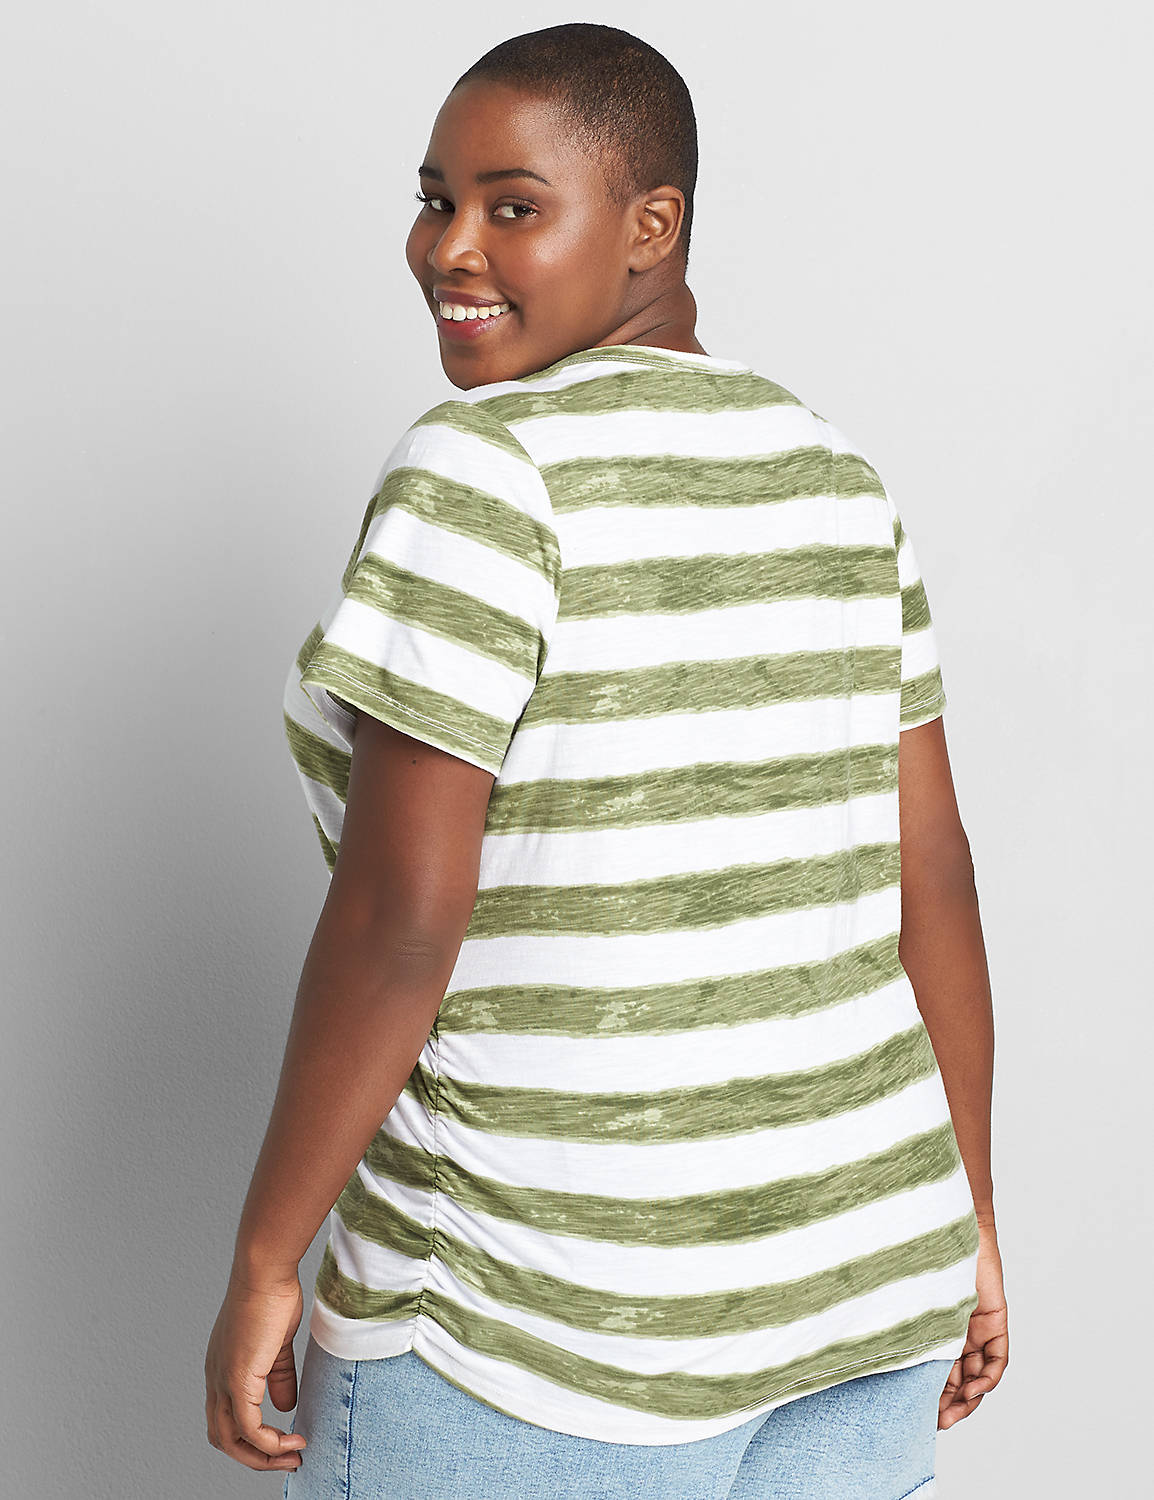 Short Sleeve V neck Side Ruched Tee 1118486 Copy of 1108460:LBPS20184_PastelStripe_colorway2:22/24 Product Image 2